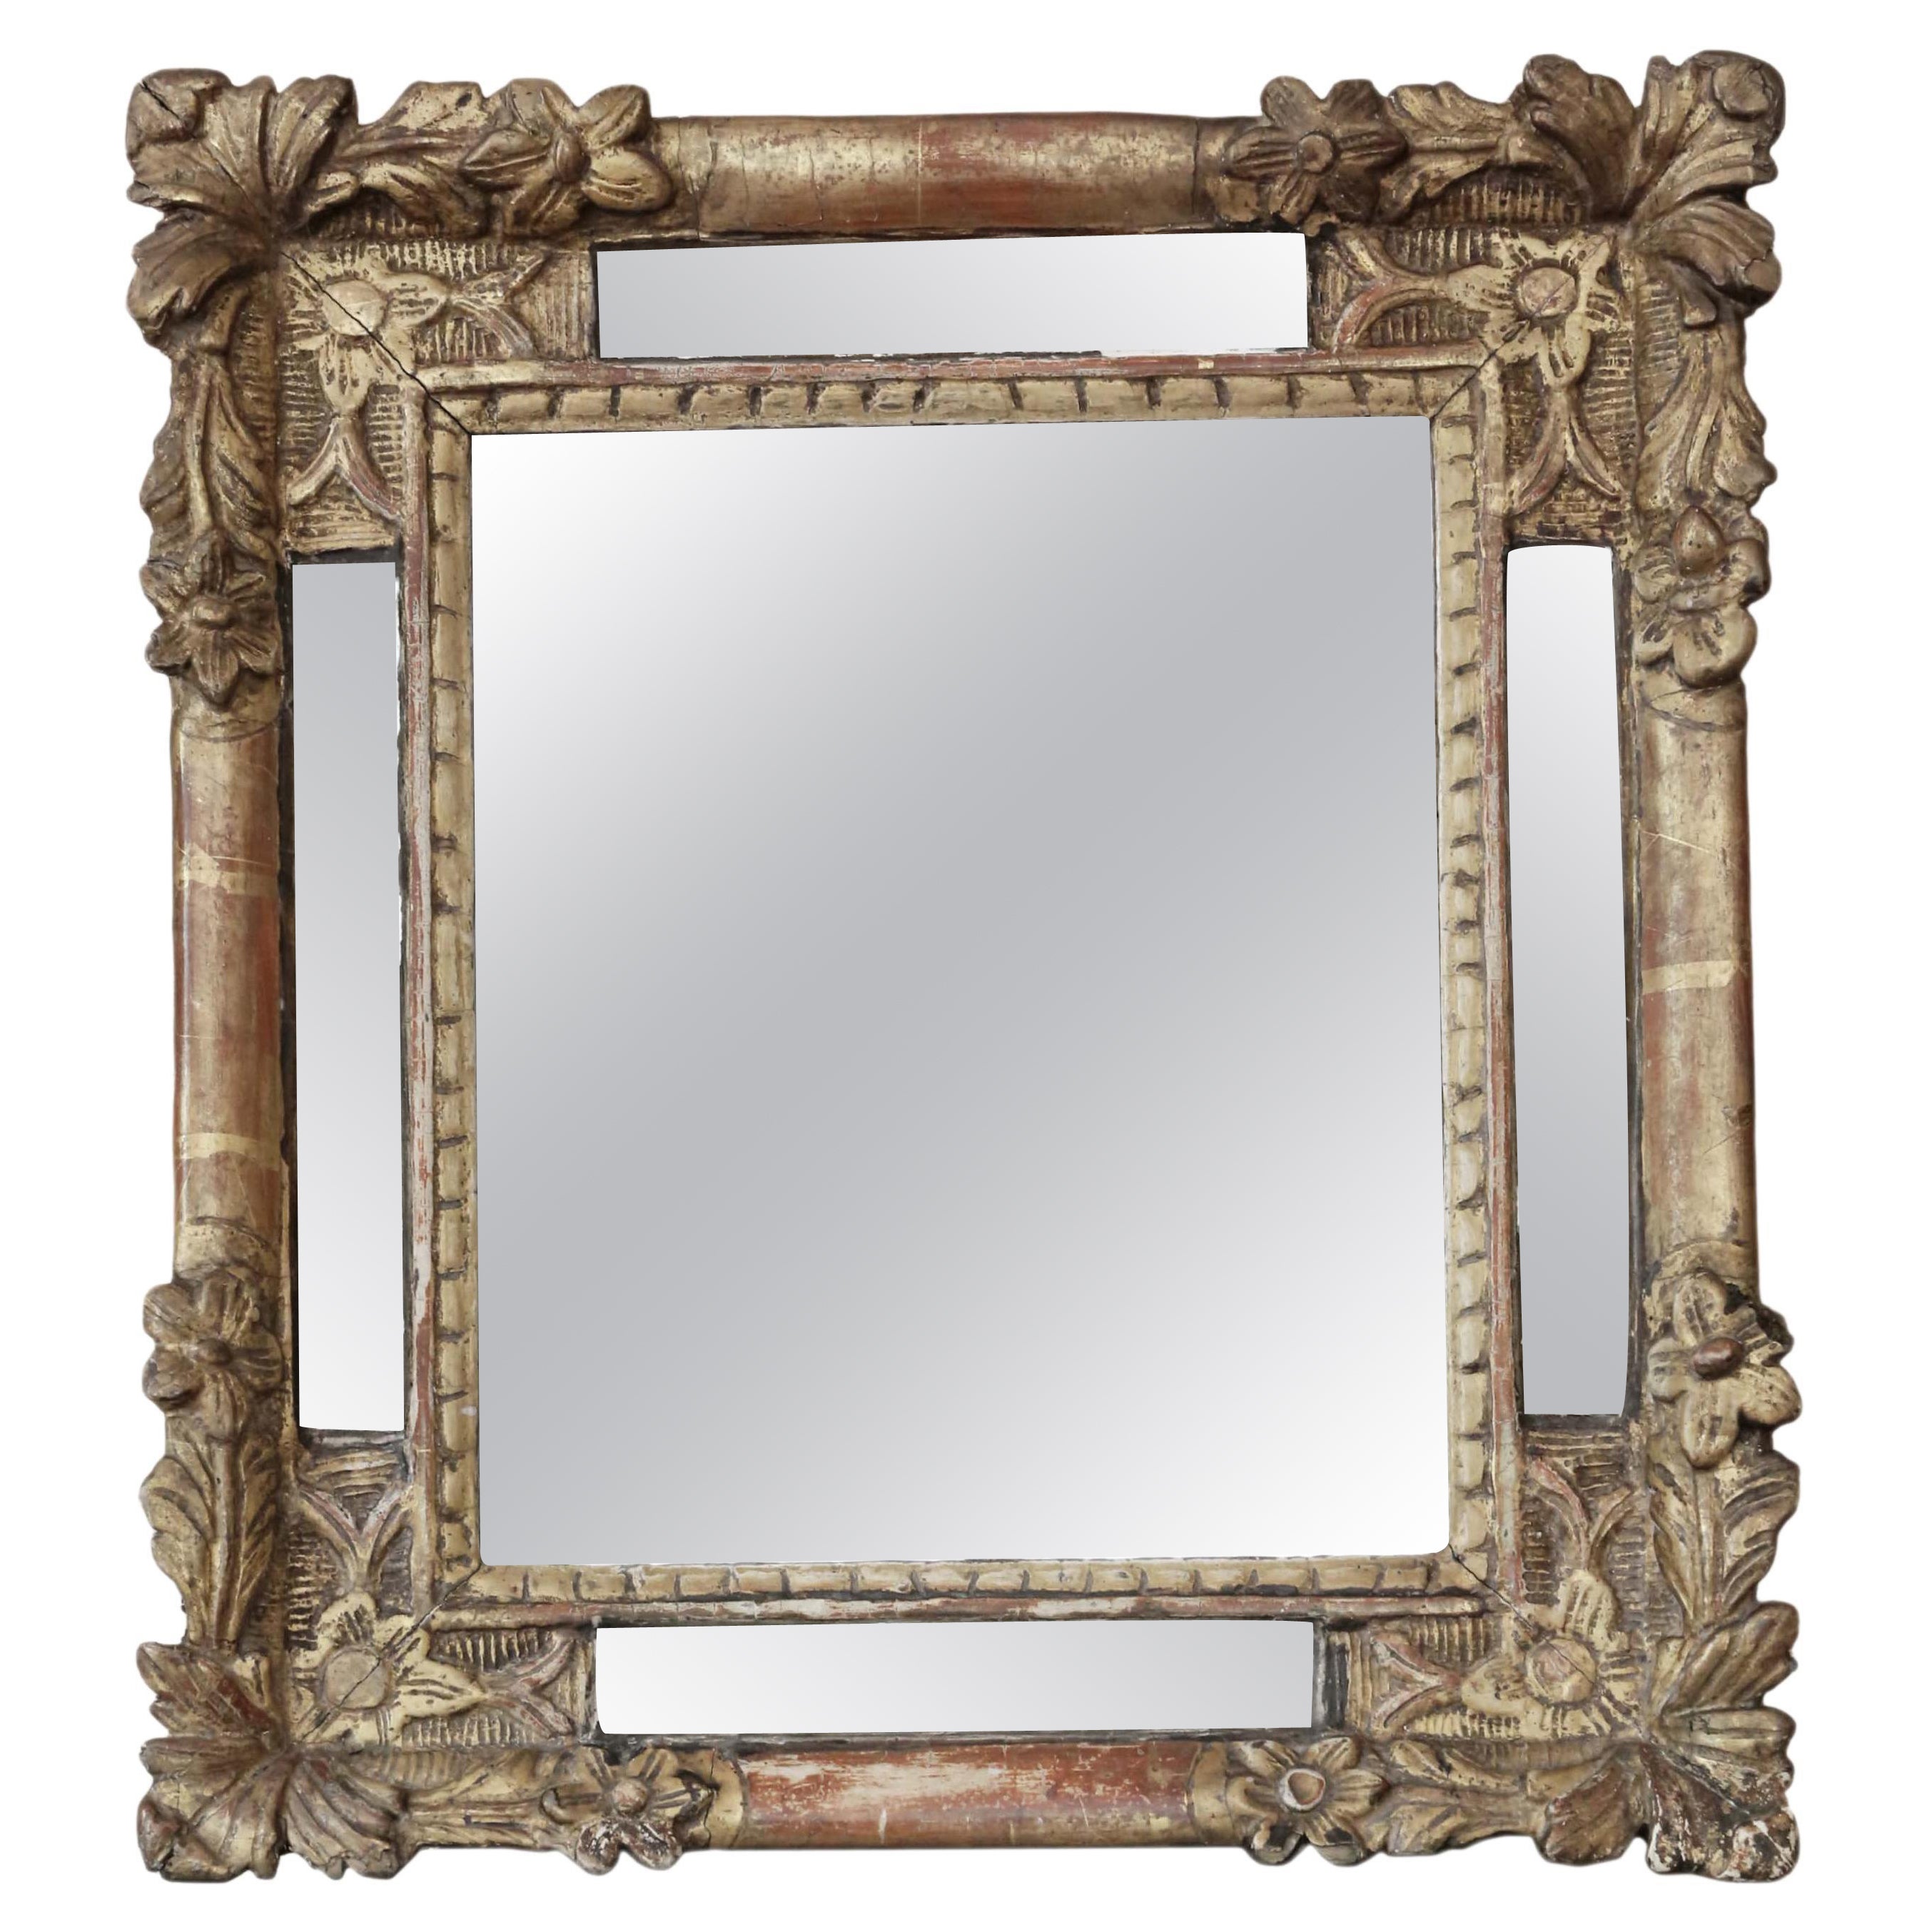 Antique Gilt Overmantle Wall Mirror Early 19th Century For Sale